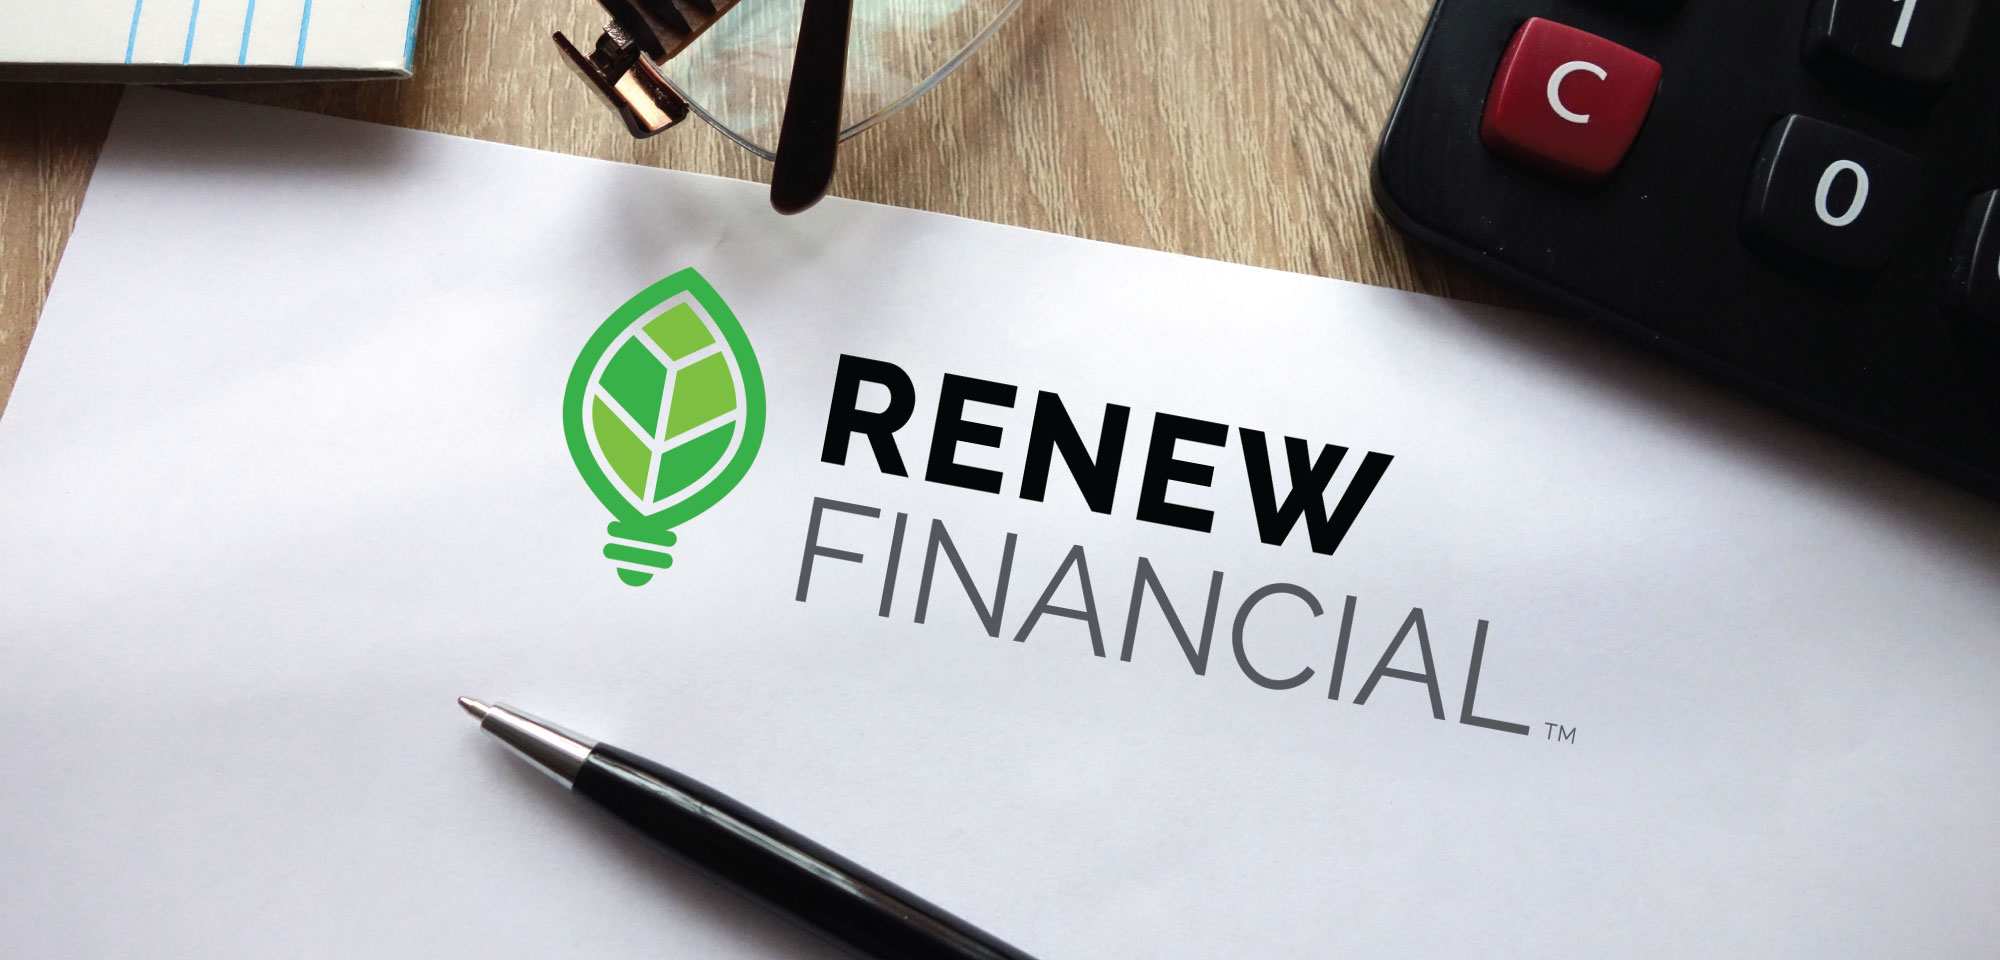 Renew Financial solar loans: Everything you need to know